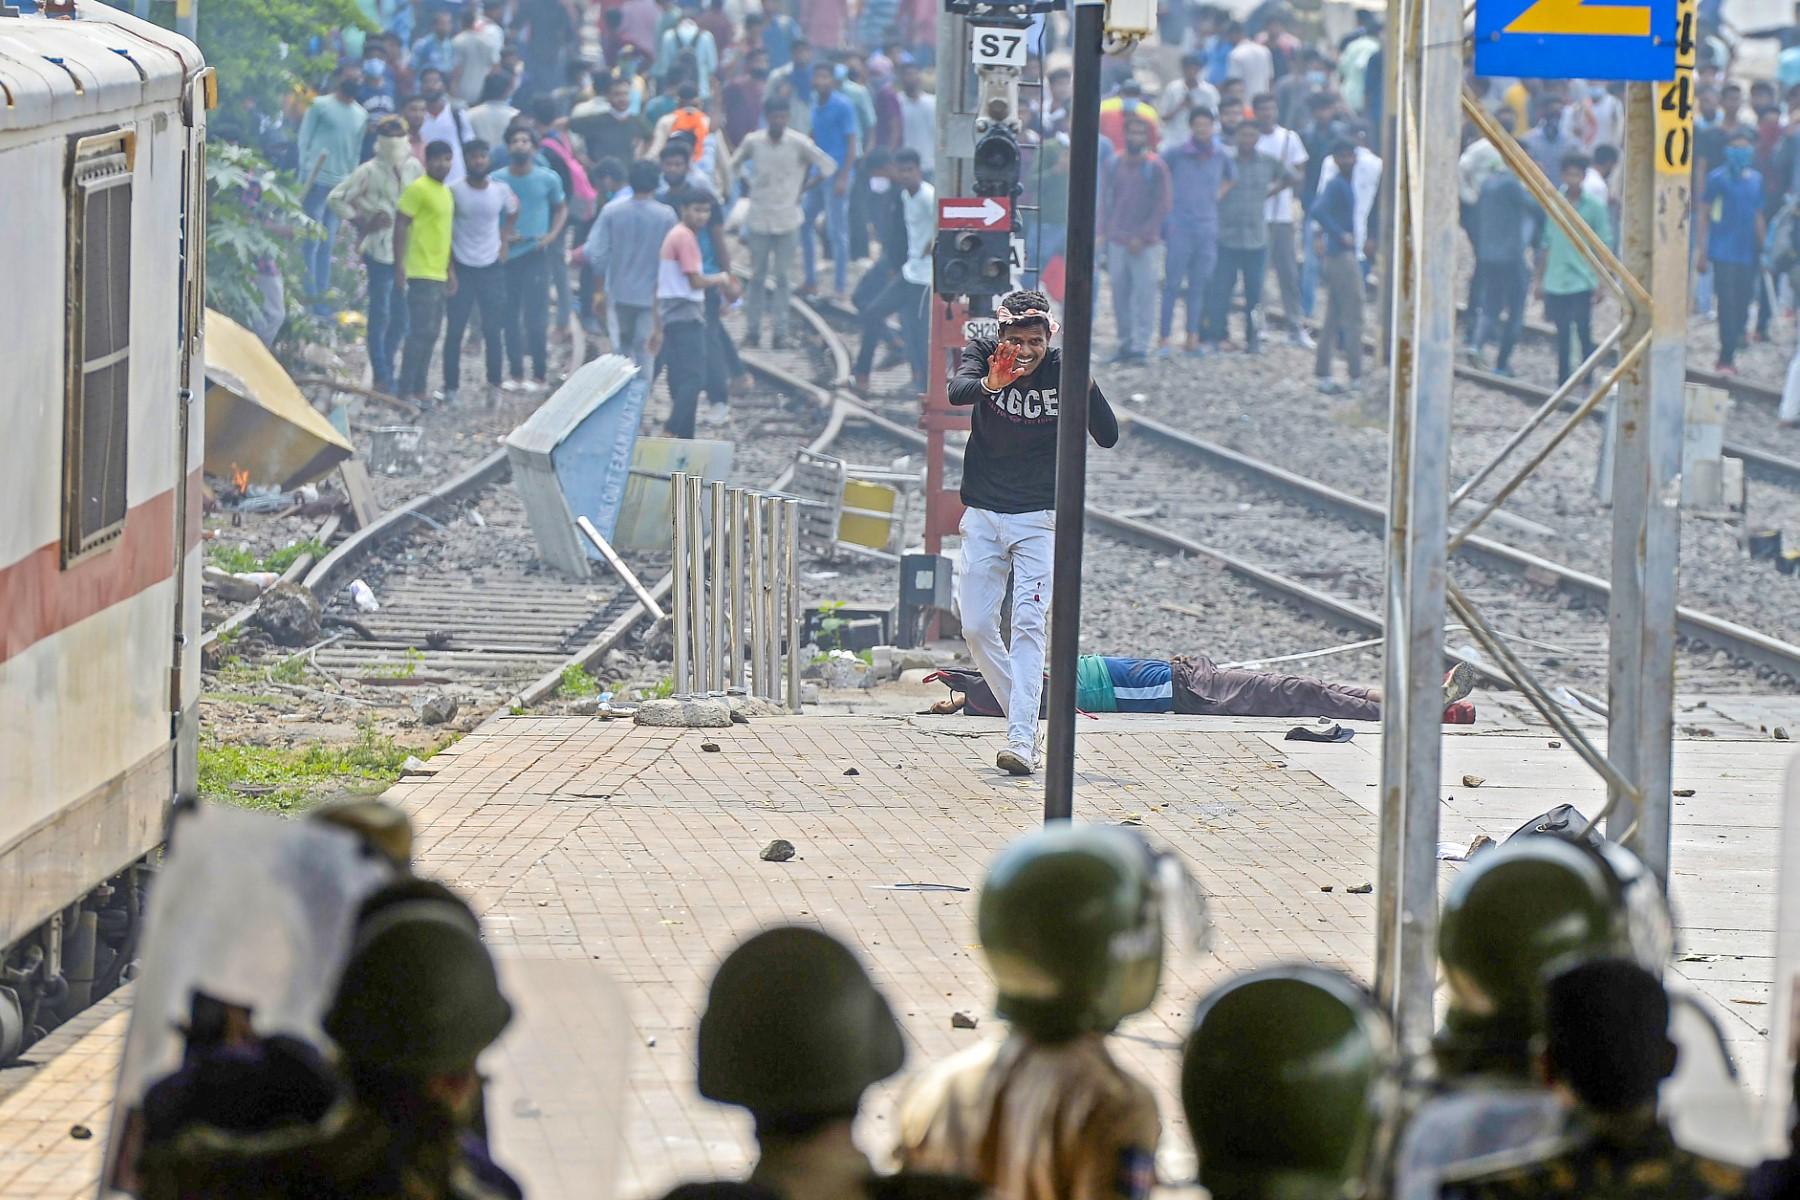 A protester reacts in front of a wounded man after police opened fire to disperse protesters during a demonstration against the government's new recruitment scheme for the army, navy, and air forces at a railway station in Secunderabad on June 17. Photo: AFP